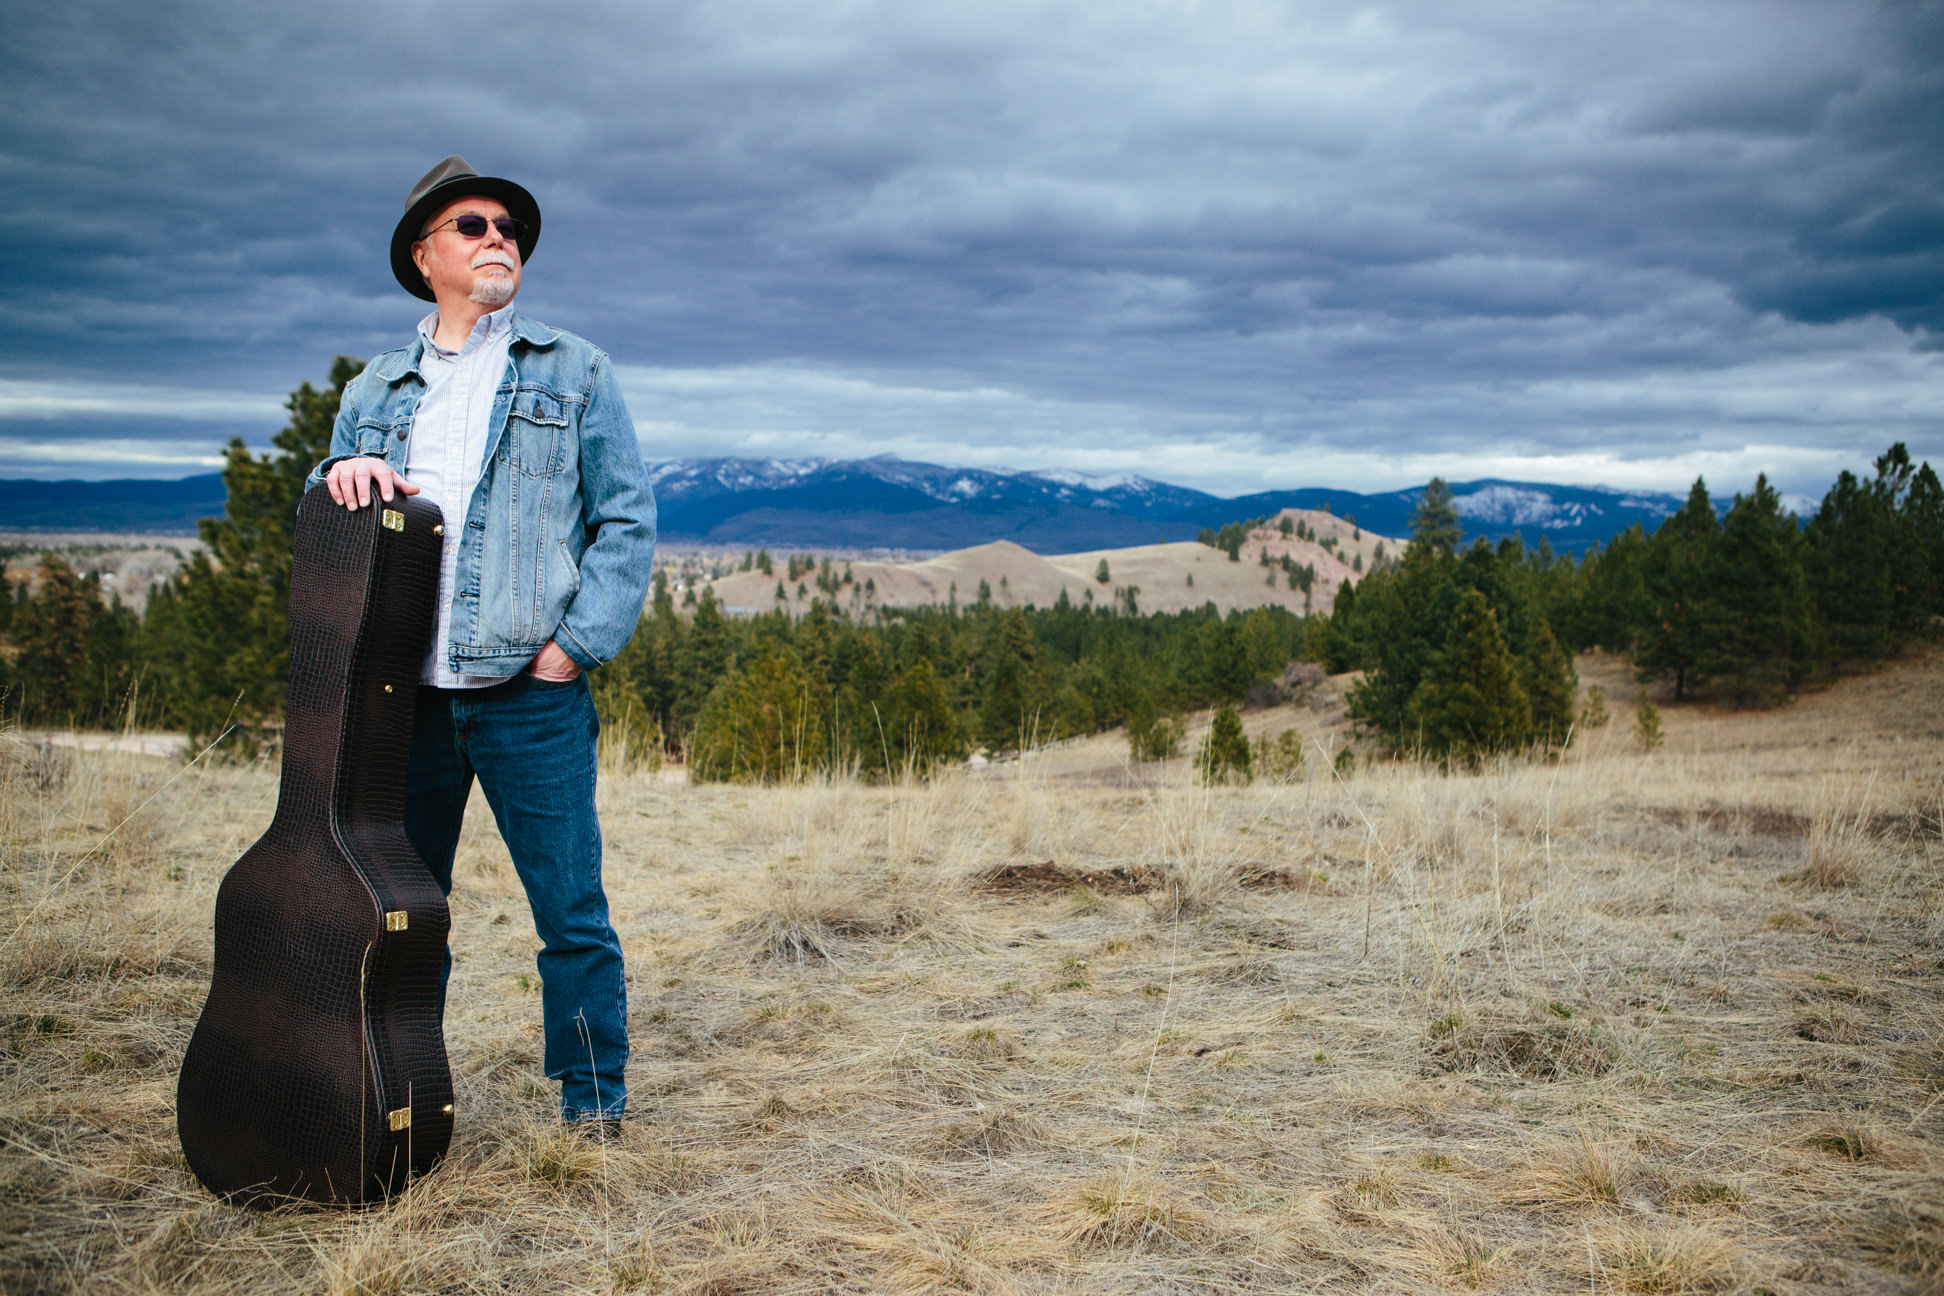 A man poses and leans against his guitar case in Missoula Montana